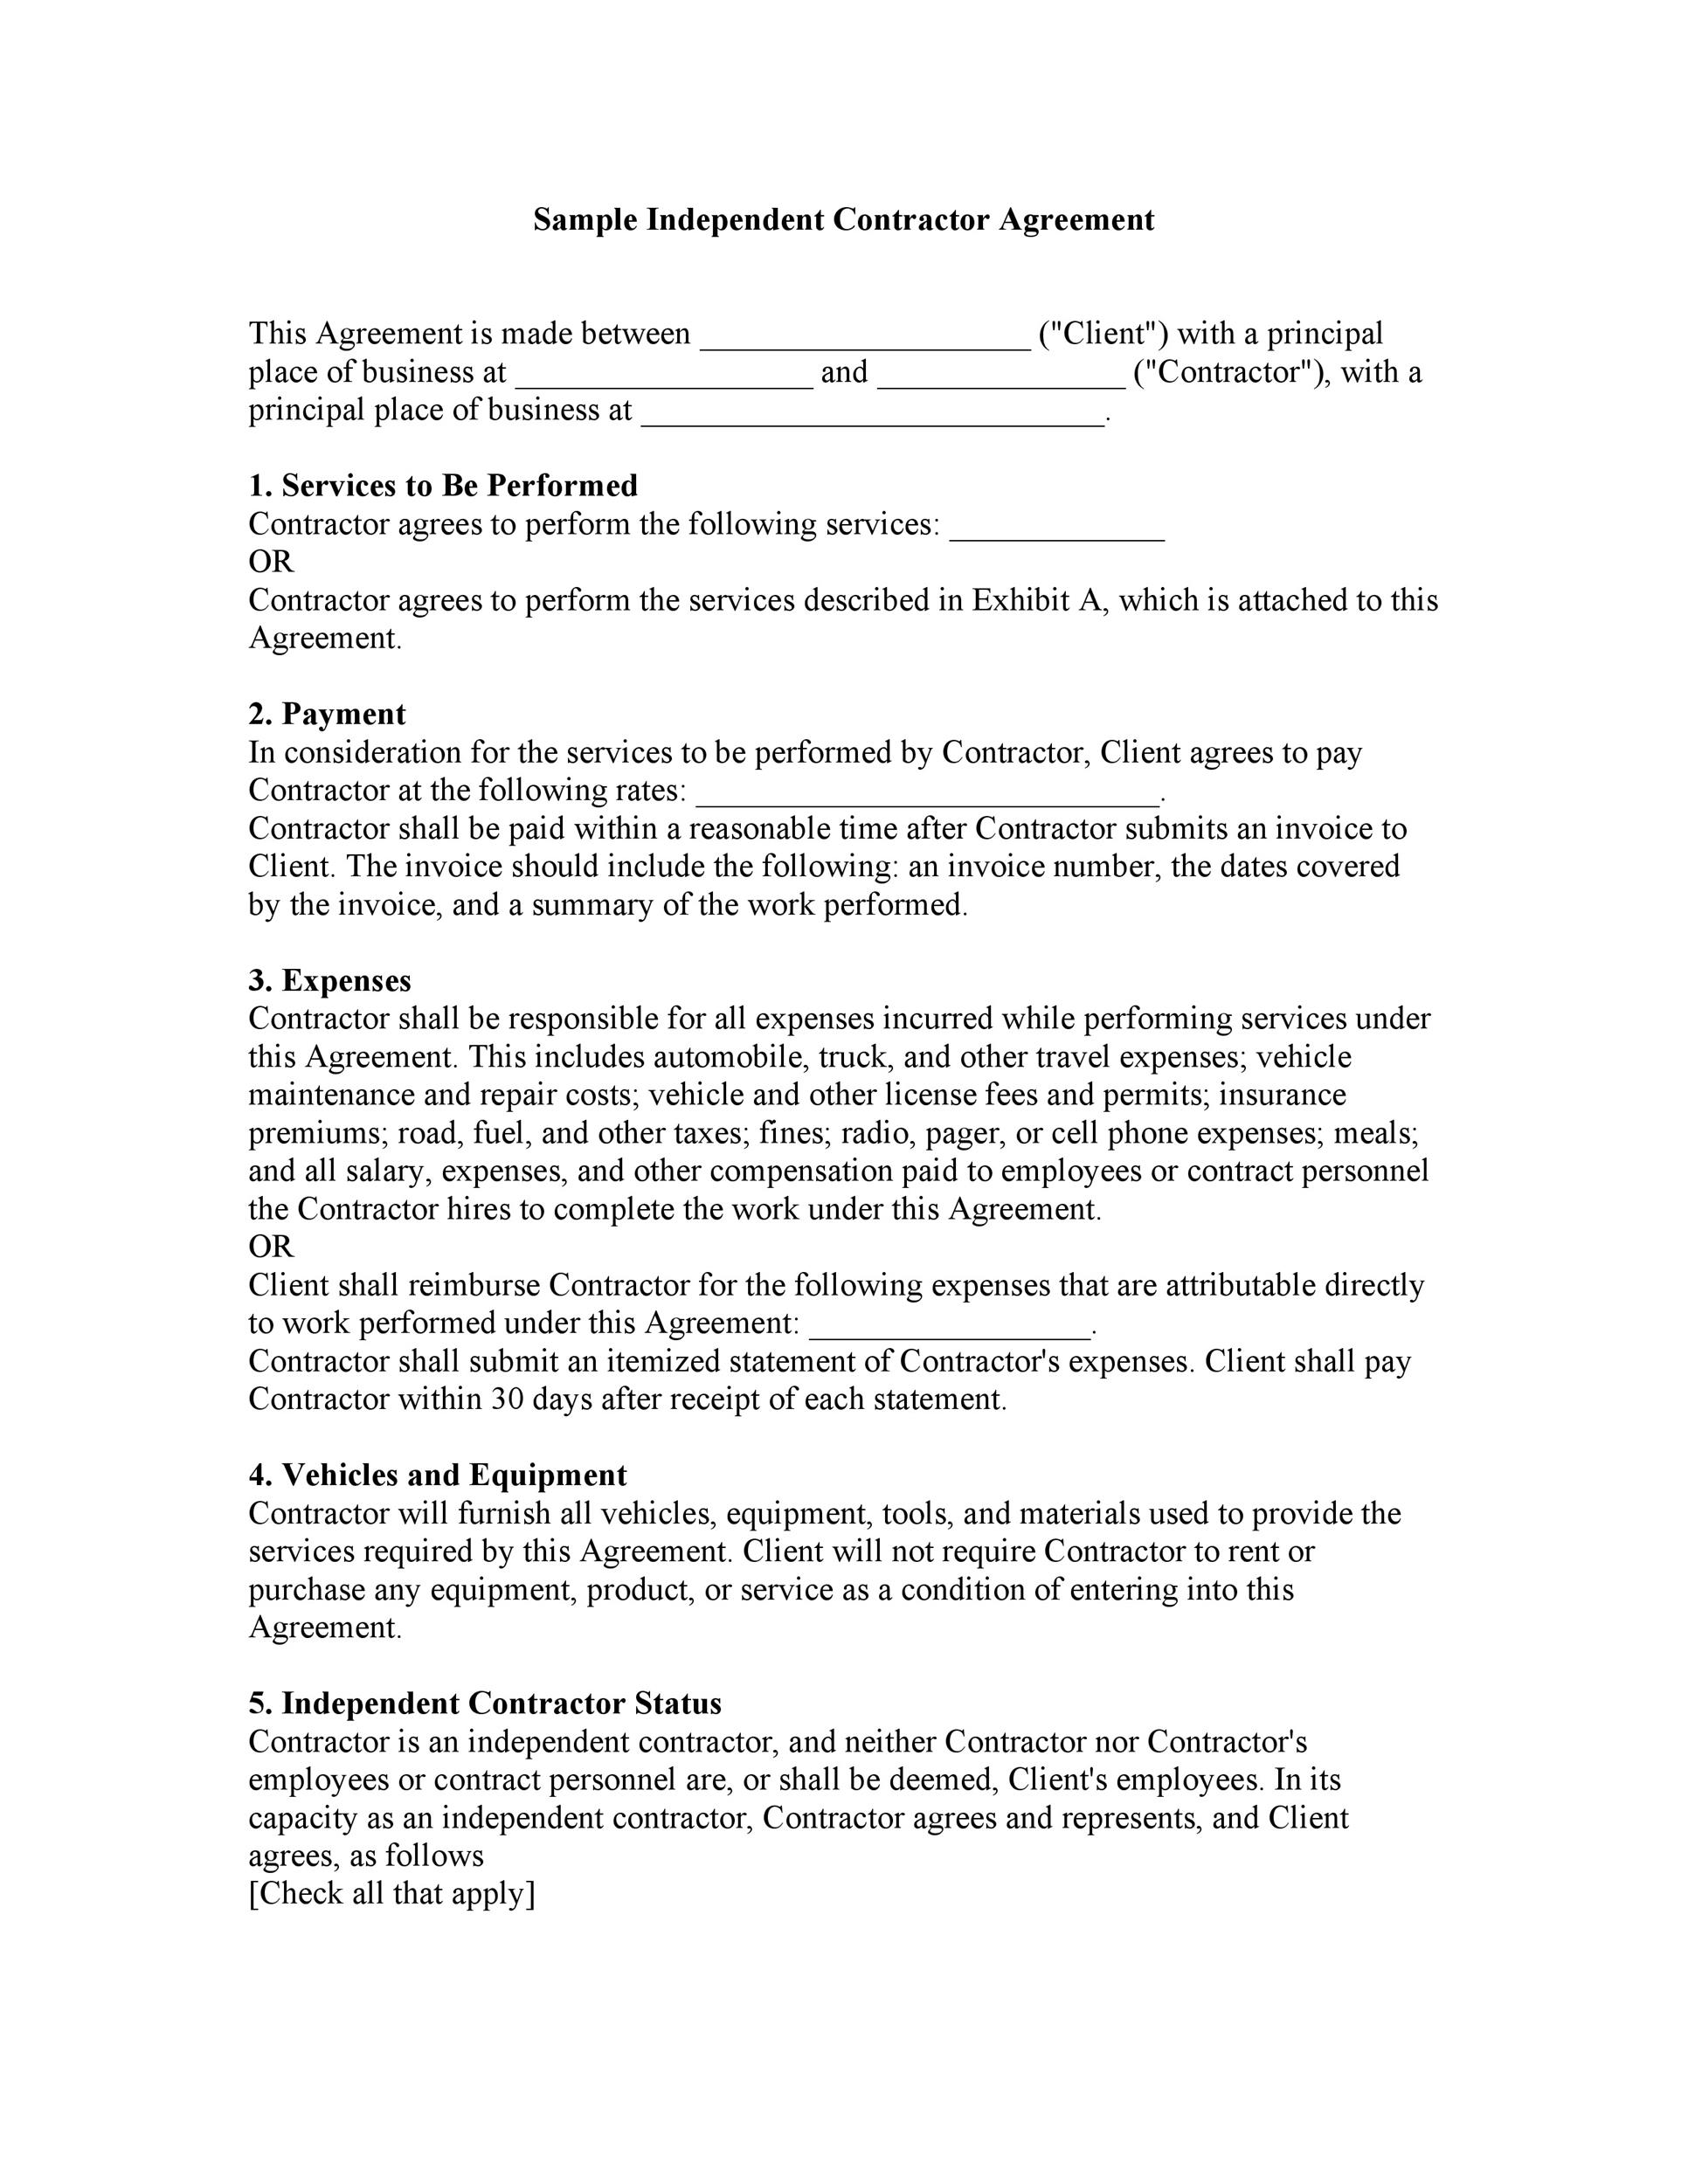 Independent Contractor Termination Letter Sample from templatelab.com